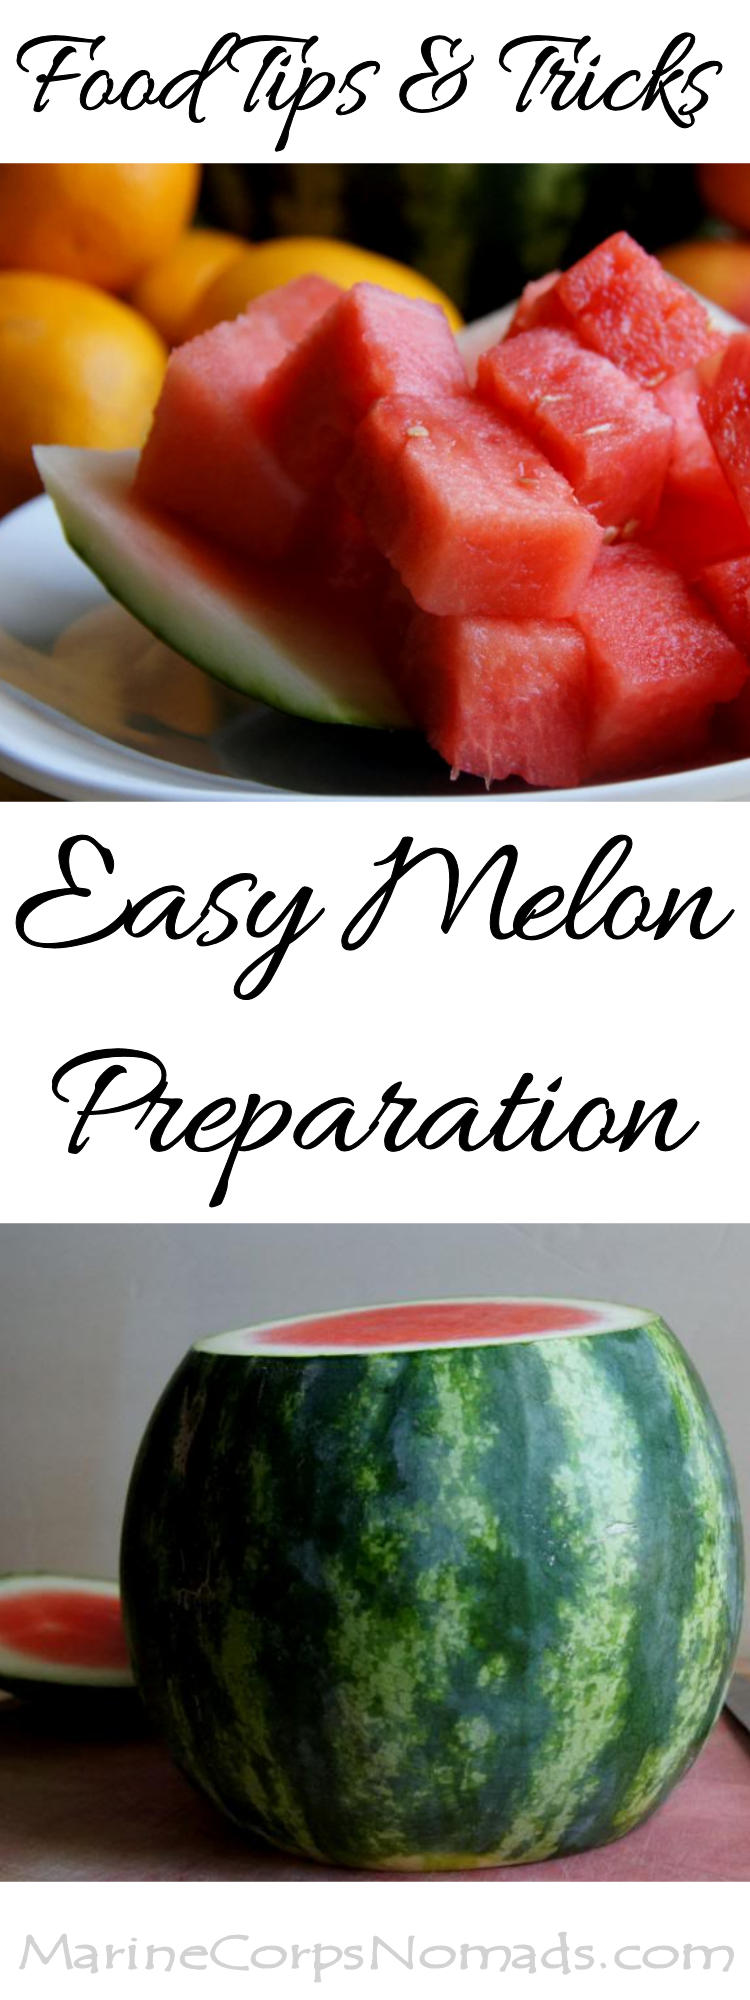 Tips for Easy Melon Preparation | Food Tips and Tricks | Marine Corps Nomads